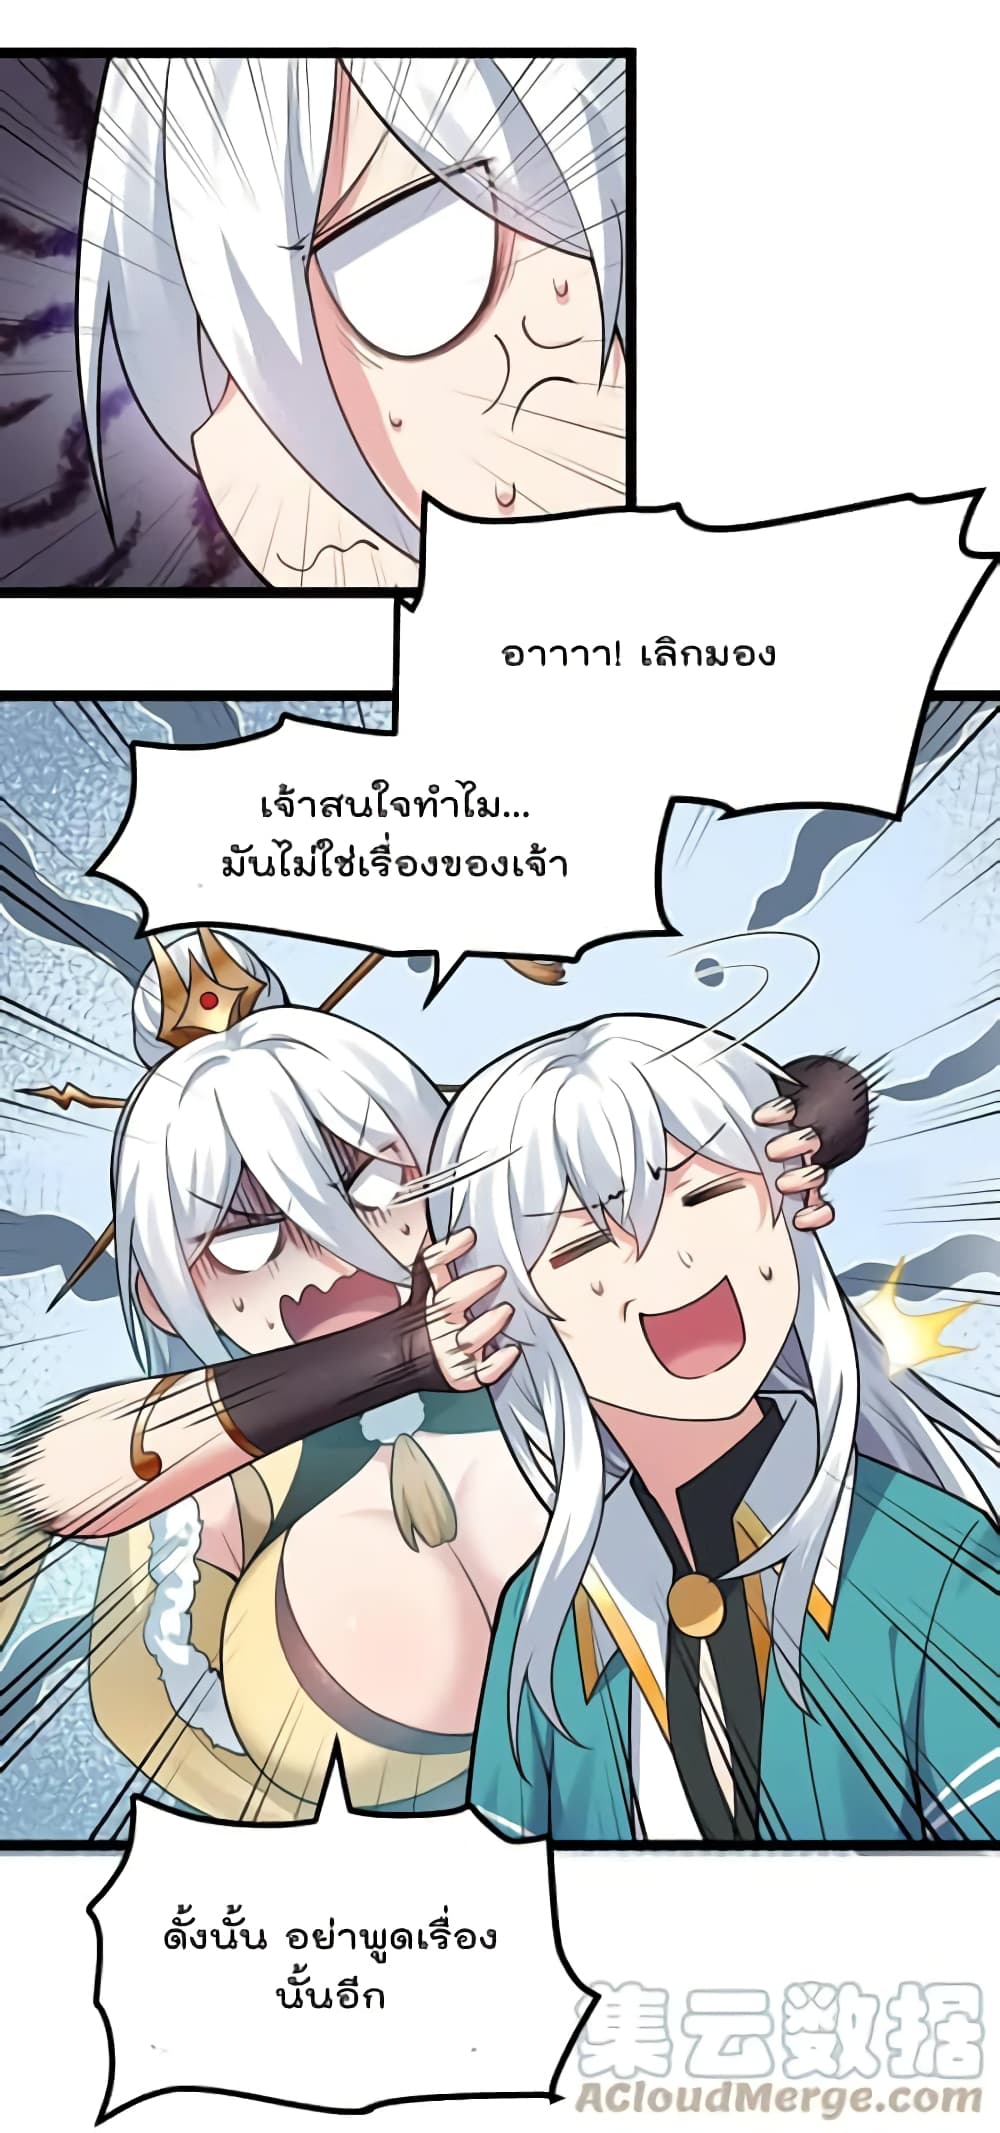 Godsian Masian from Another World ตอนที่ 116 (23)